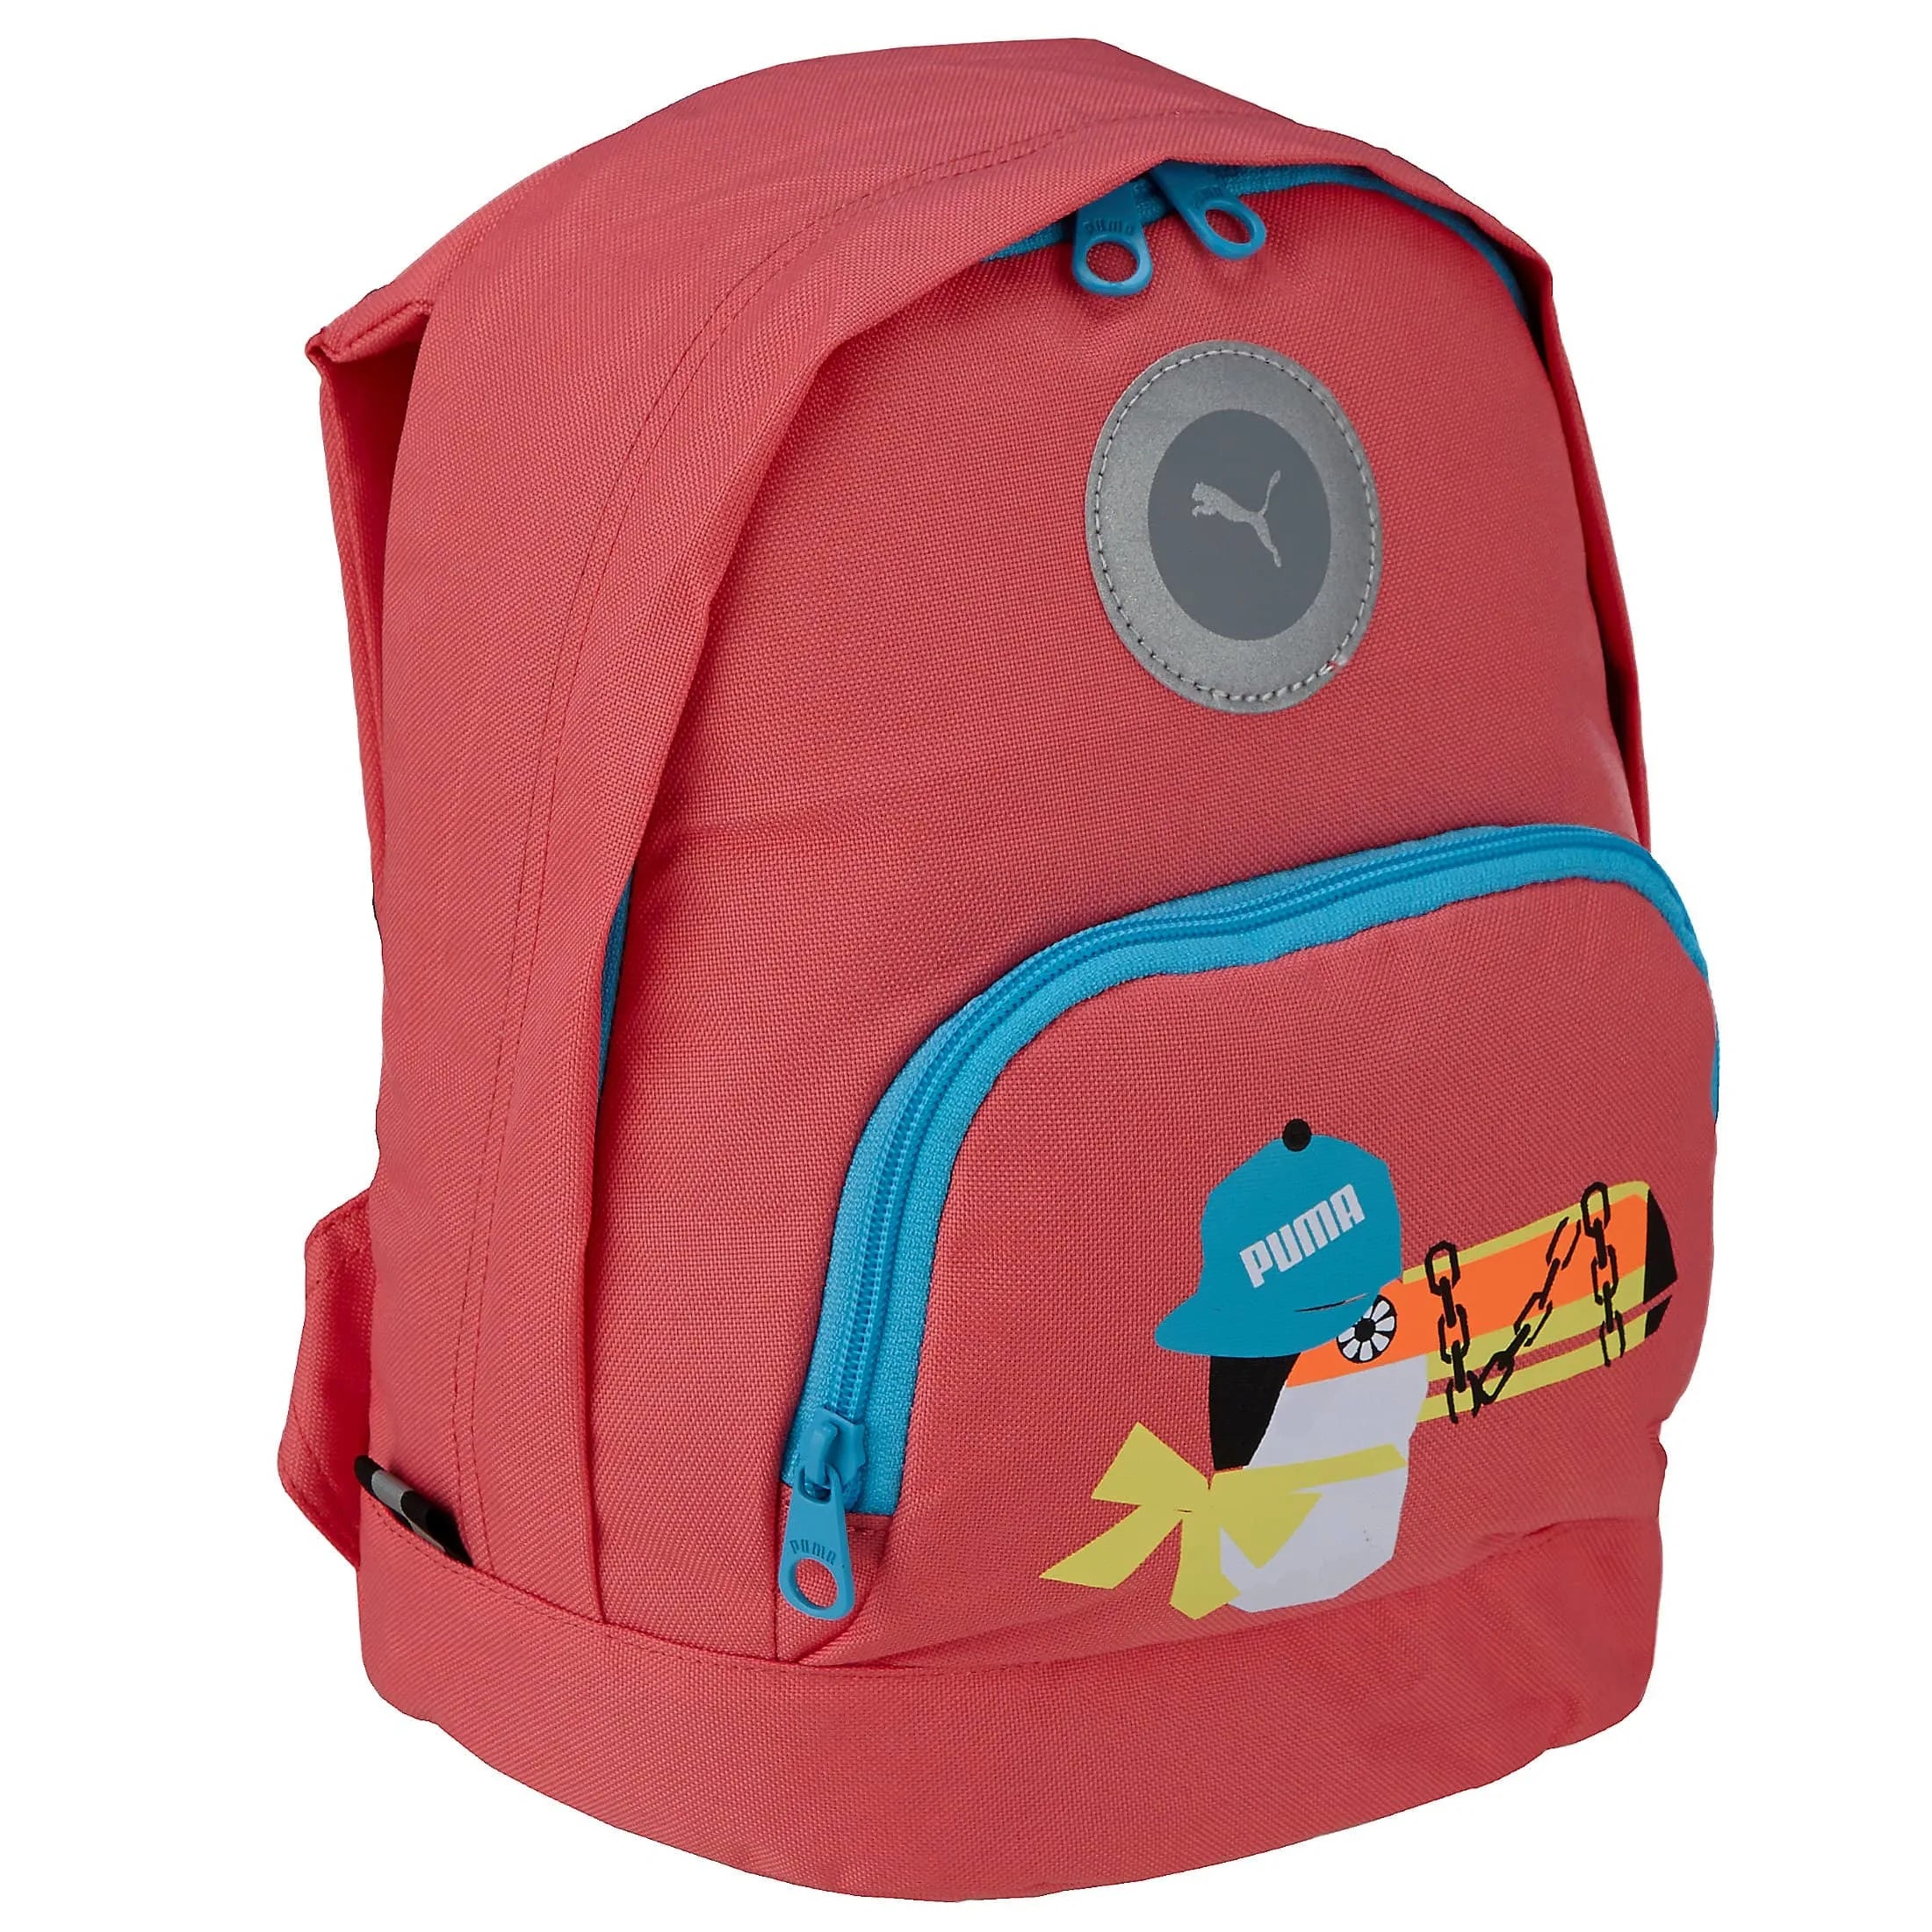 Puma Primary Small Backpack Backpack 28 cm - calypso coral-bird graphic